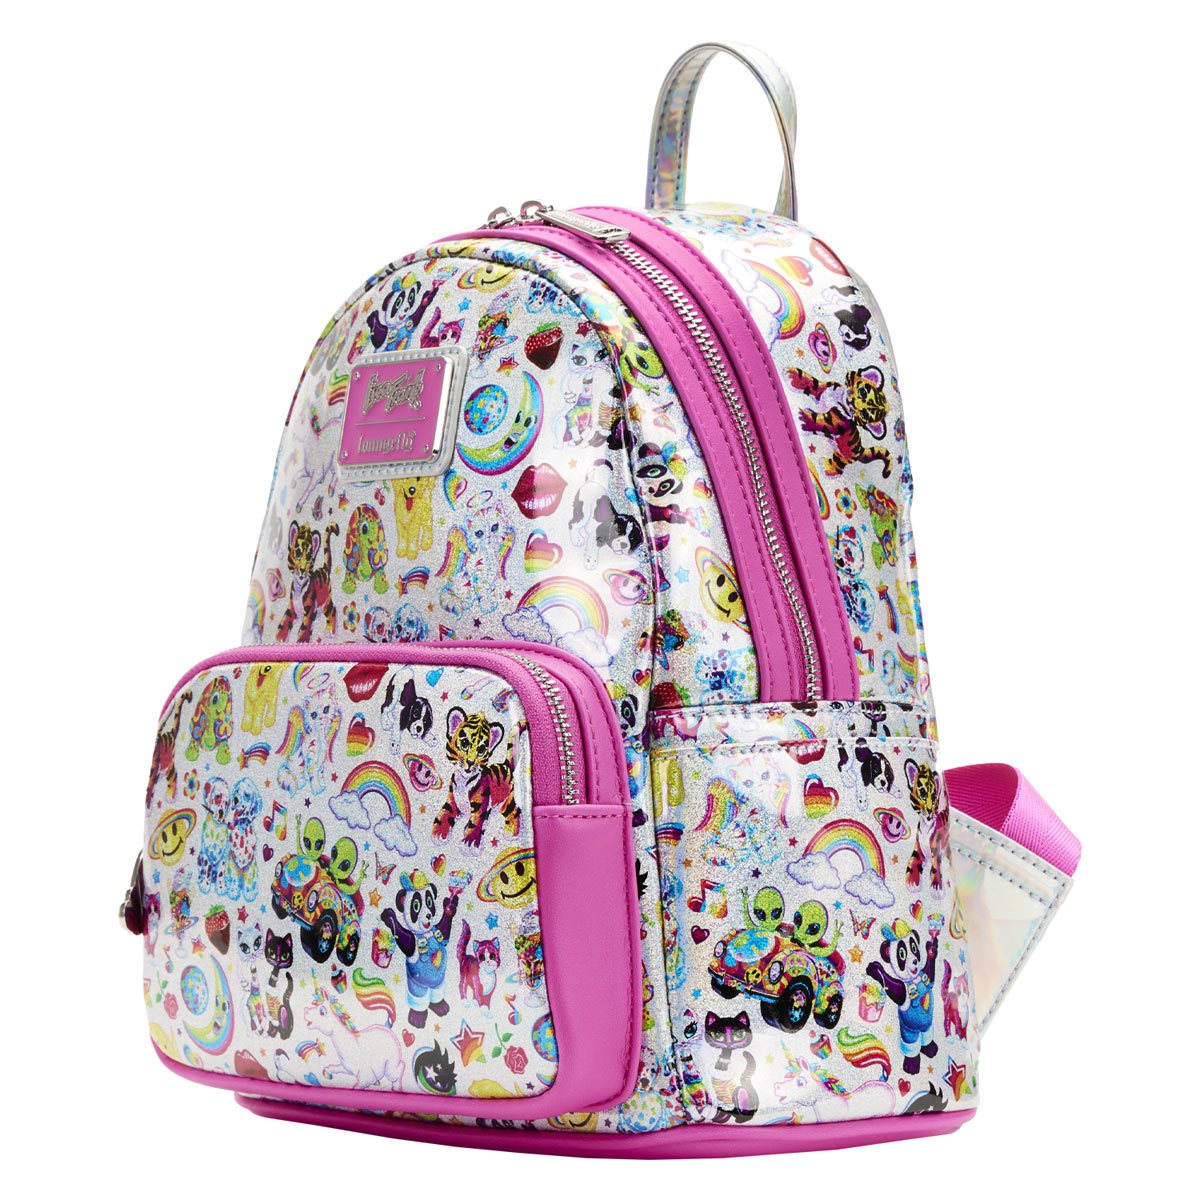 Lacc Exclusive - Hello Kitty Iridescent Mini Backpack | Officially Licensed | Vegan Leather